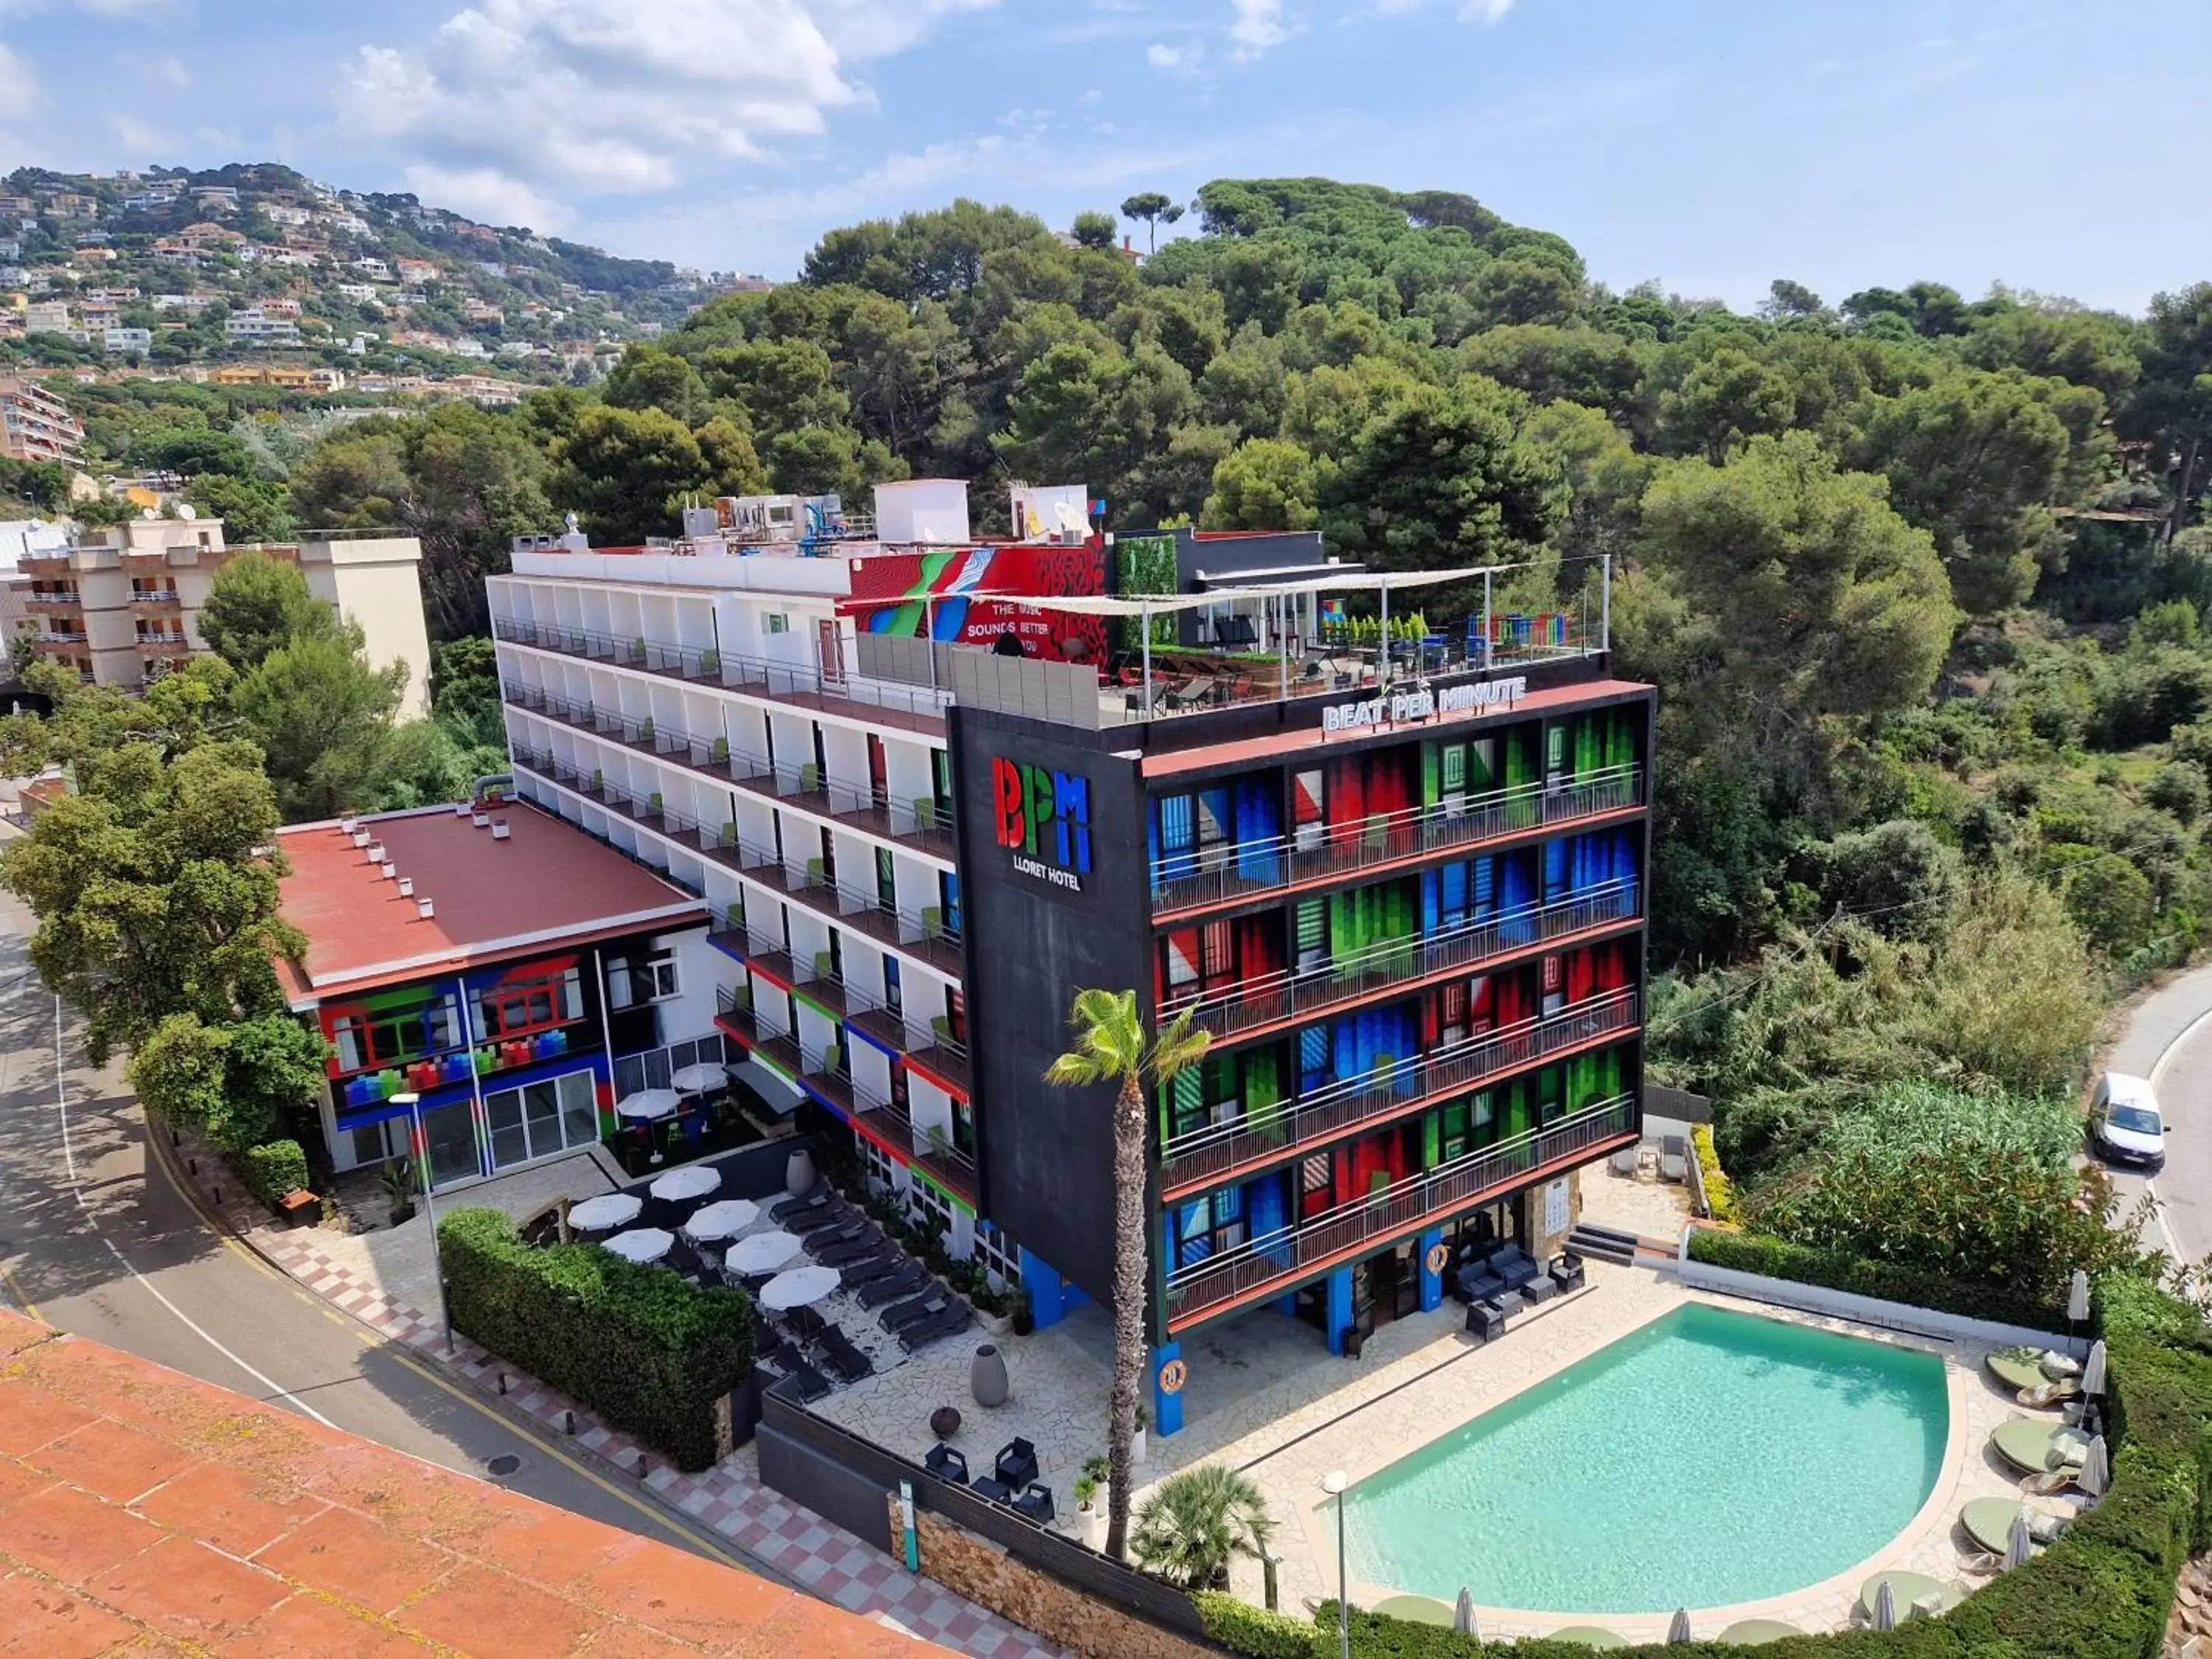 Property building, Pool View in BPM Lloret Hotel - 30º Hotels